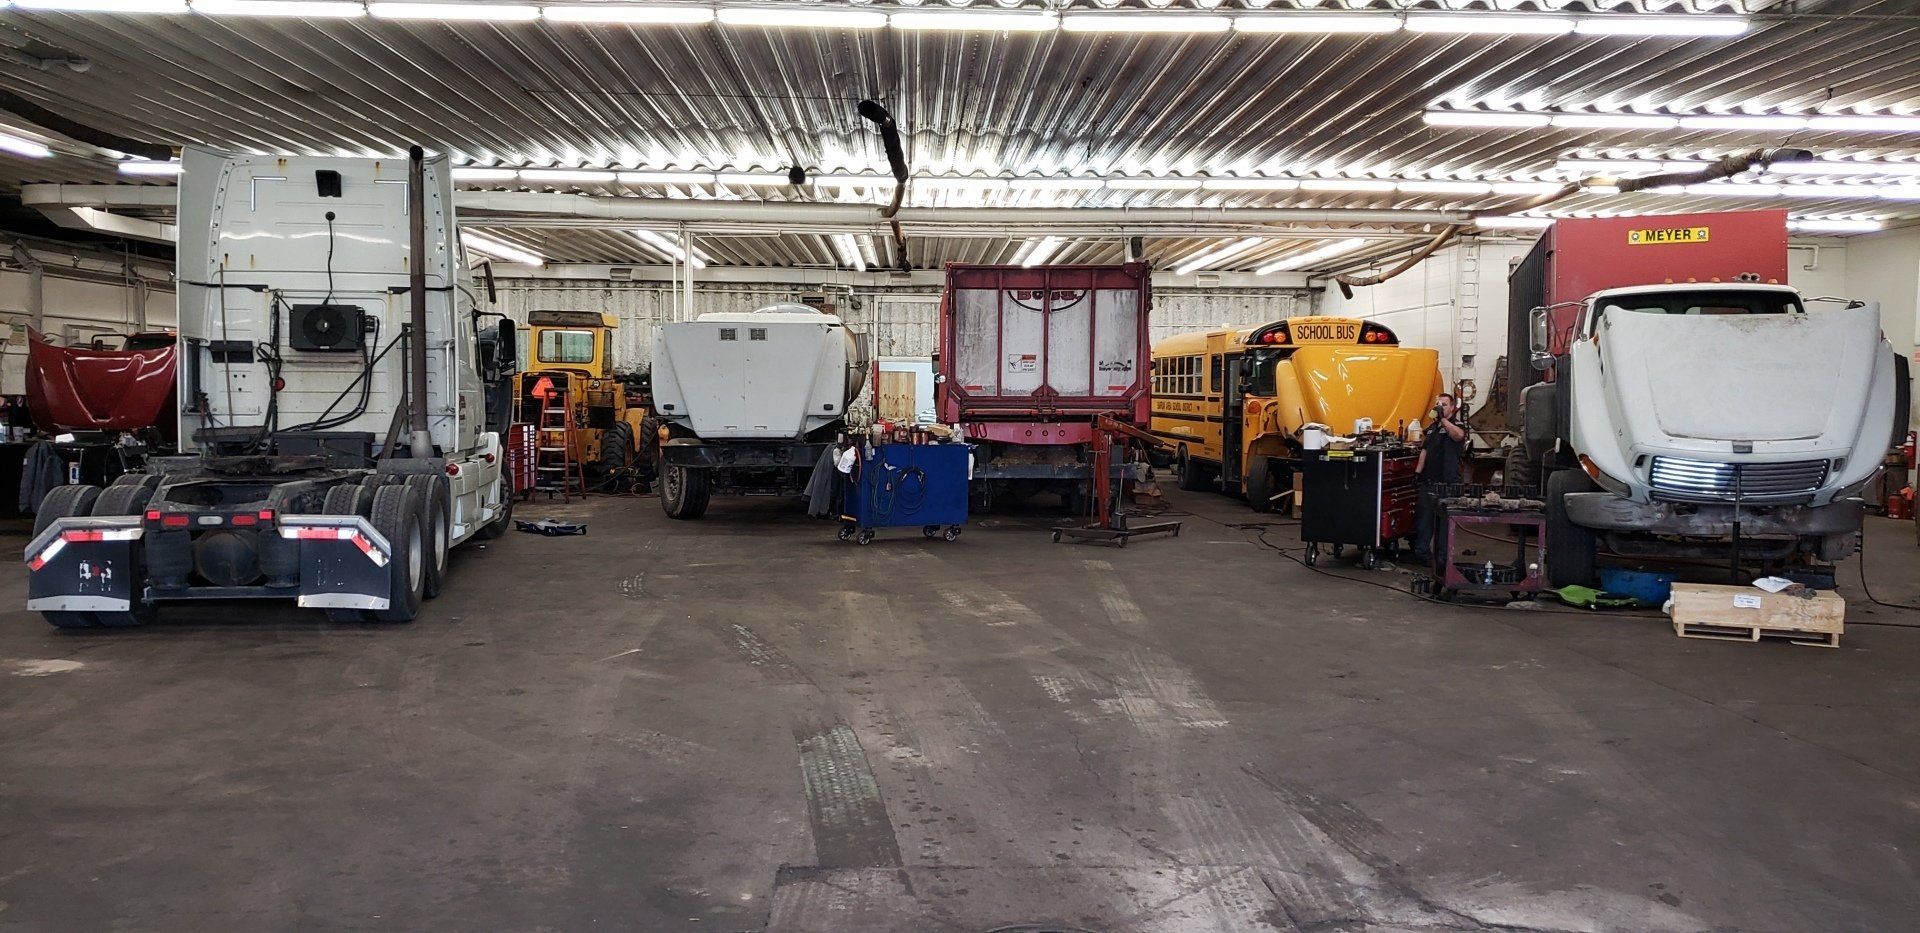 Our highly skilled service technicians are dedicated to providing exceptional maintenance and diesel repair services for your trucks. Trust the experts at Meyer Trucks.